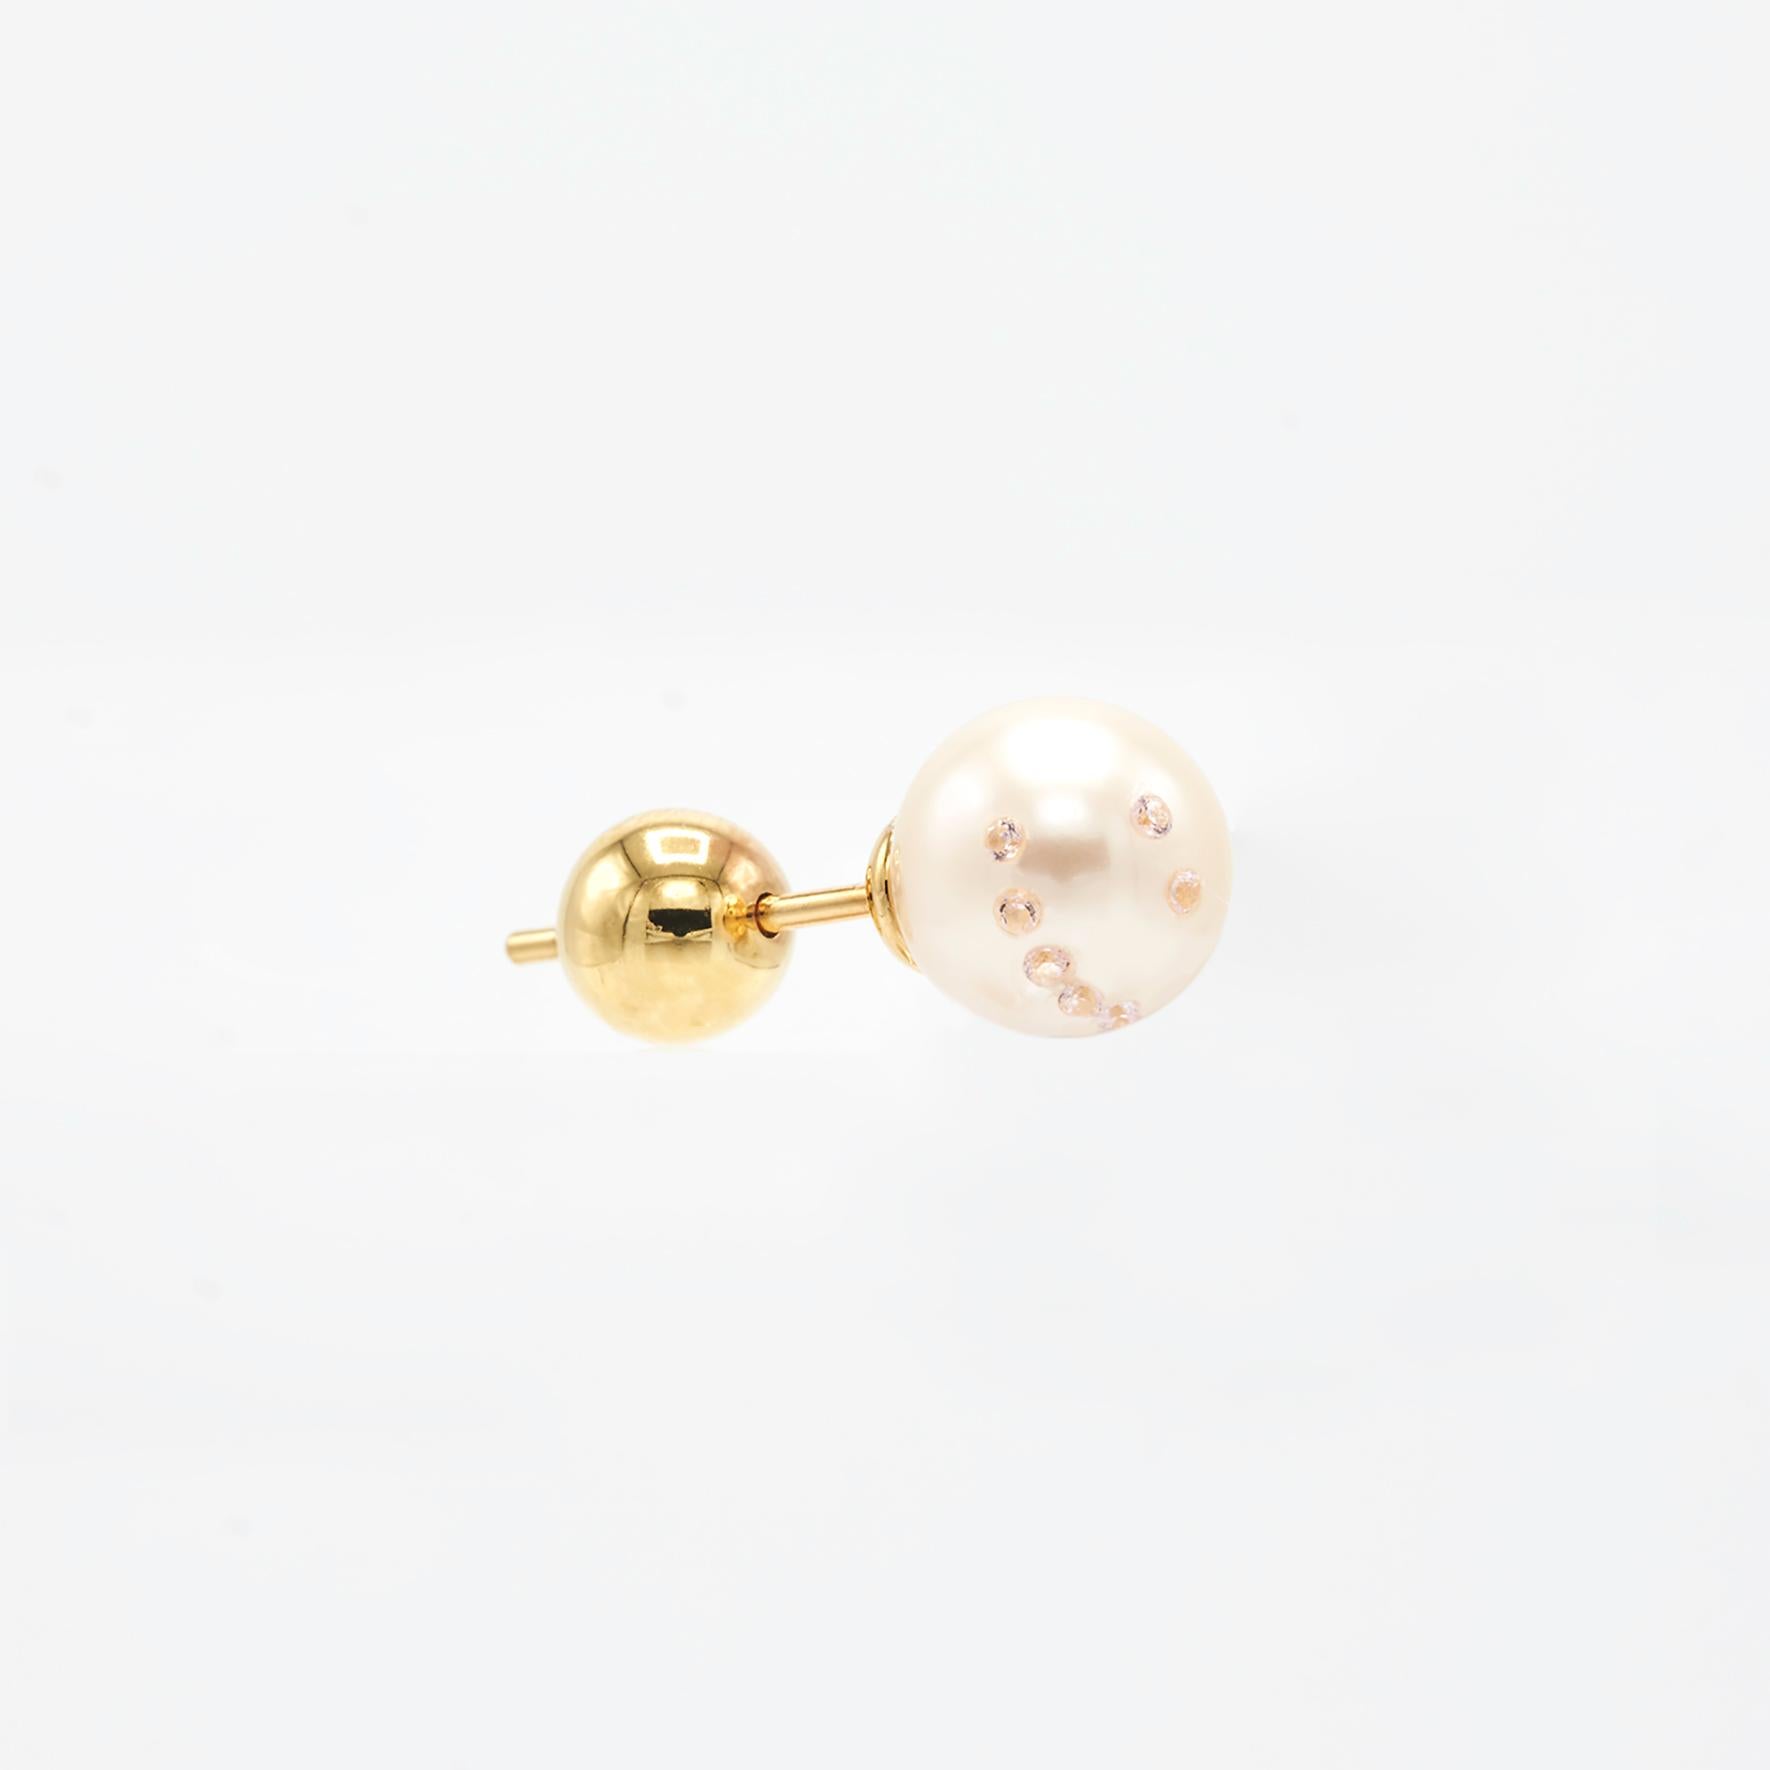 Round Pearl Ear Studs smile face with cubic zirconia

Dimensions: 7mm Pearl
Compositions: Sterling Silver 24 K gold plates/ Fresh water pearl/ Cubic Zirconia

SOLD AS PAIRS